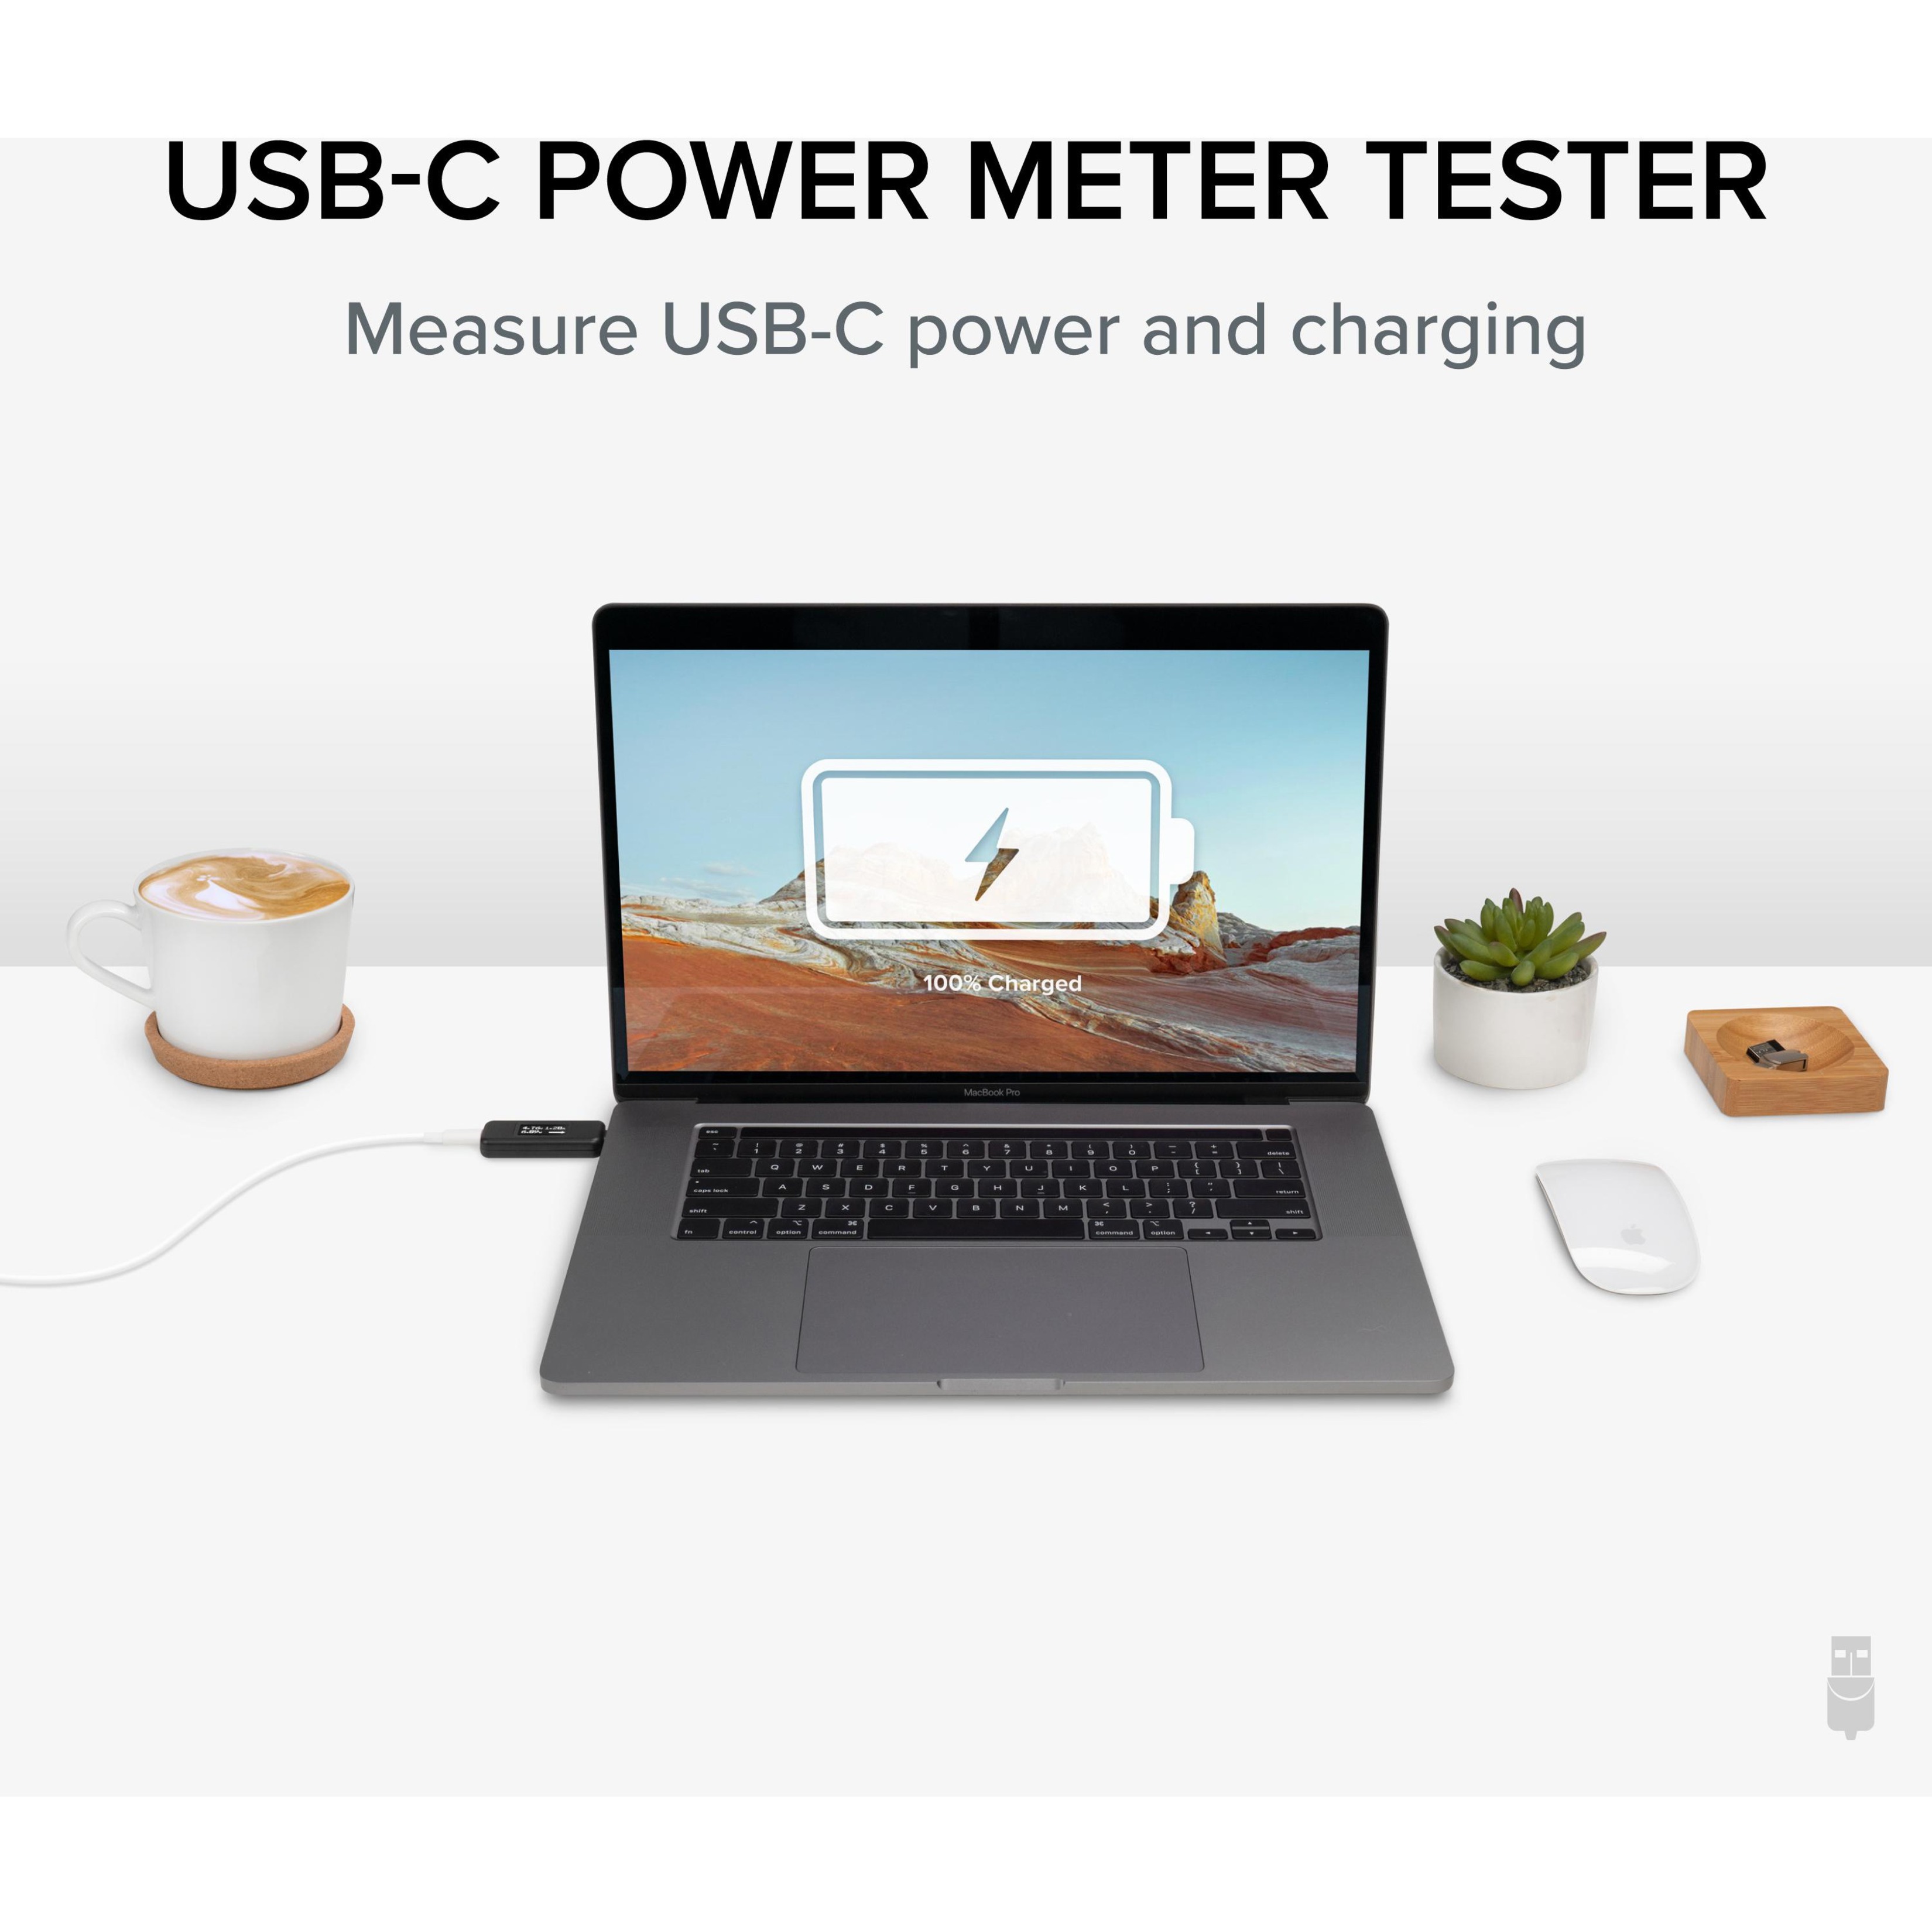 Plugable USB C Power Meter Tester for Monitoring USB-C Connections - Digital Multimeter for USB-C Cables, Laptops, Phones and Chargers - image 2 of 5